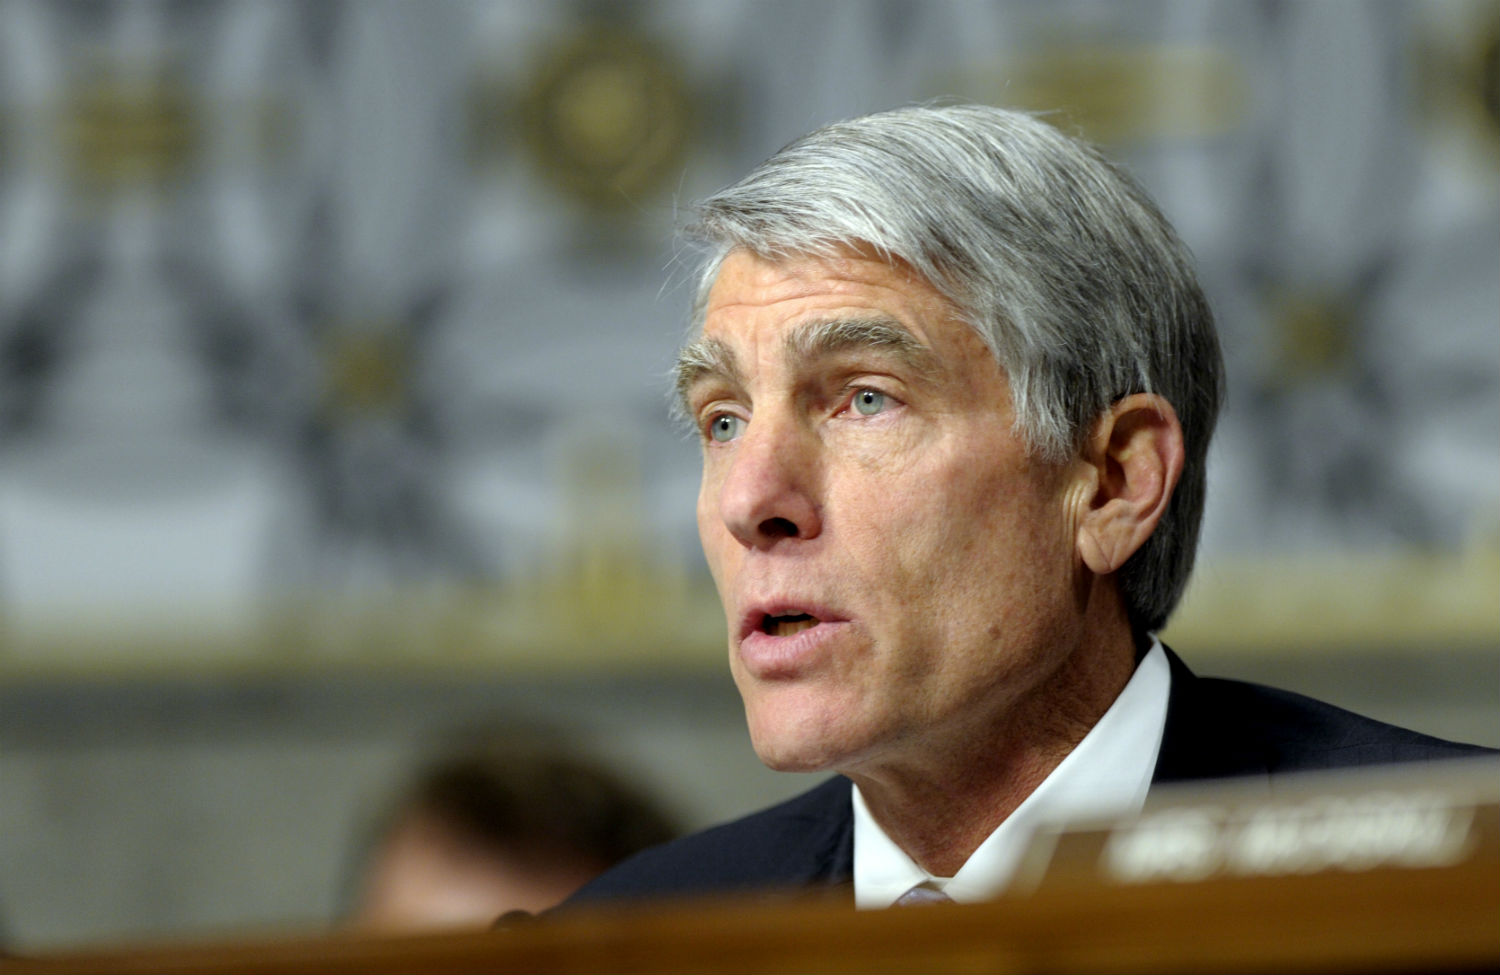 Senator Udall Discloses CIA Findings on Torture and Blasts Obama’s Inaction